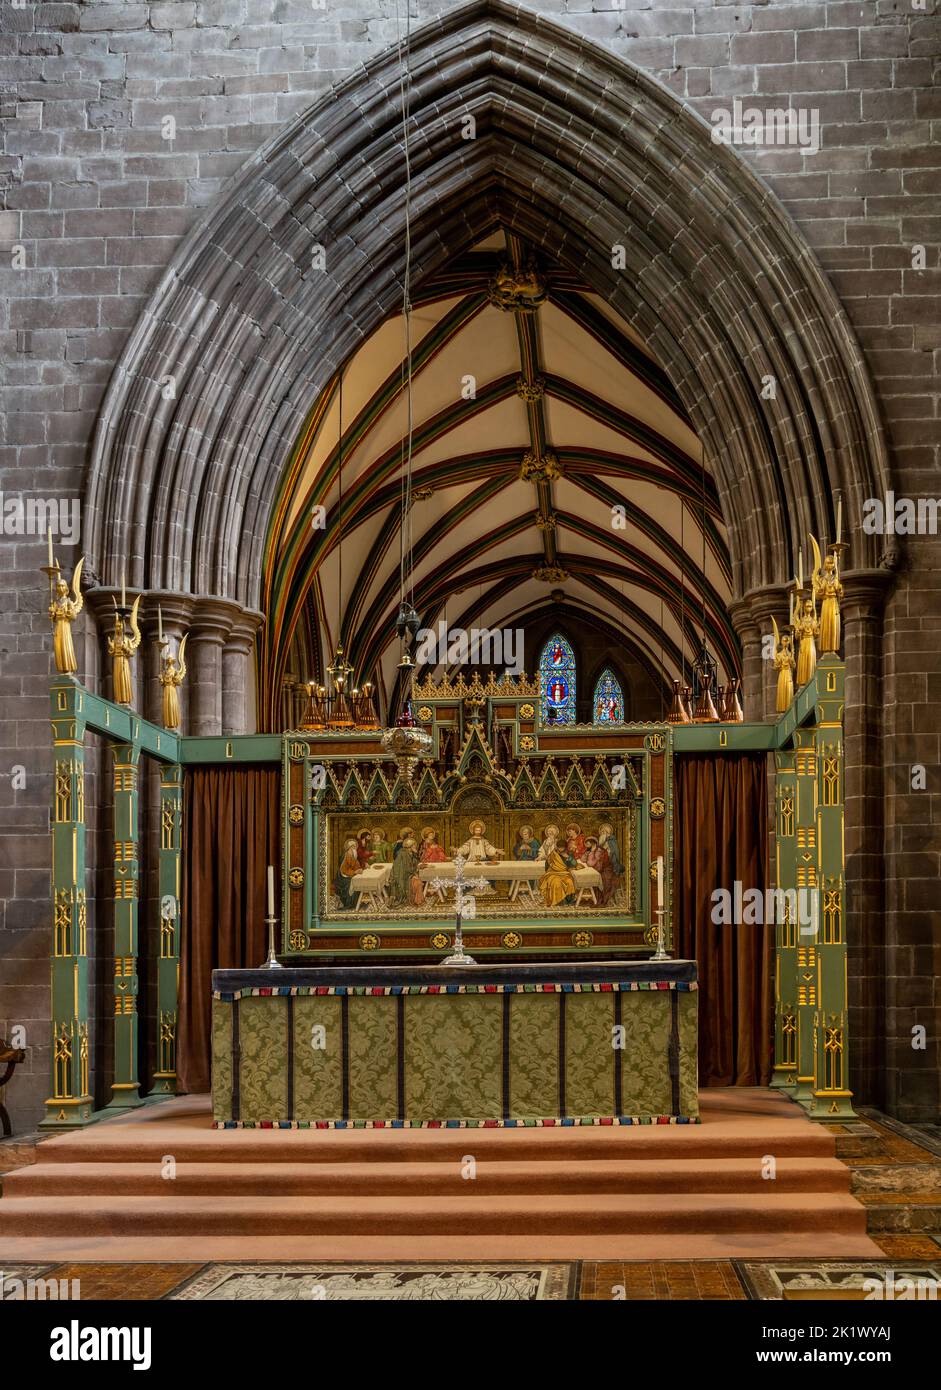 Chester, United Kingdom - 26 August, 2022: ornate gilded altar with the Last Supper painting inside the historic Chester Cathedral in Cheshire Stock Photo